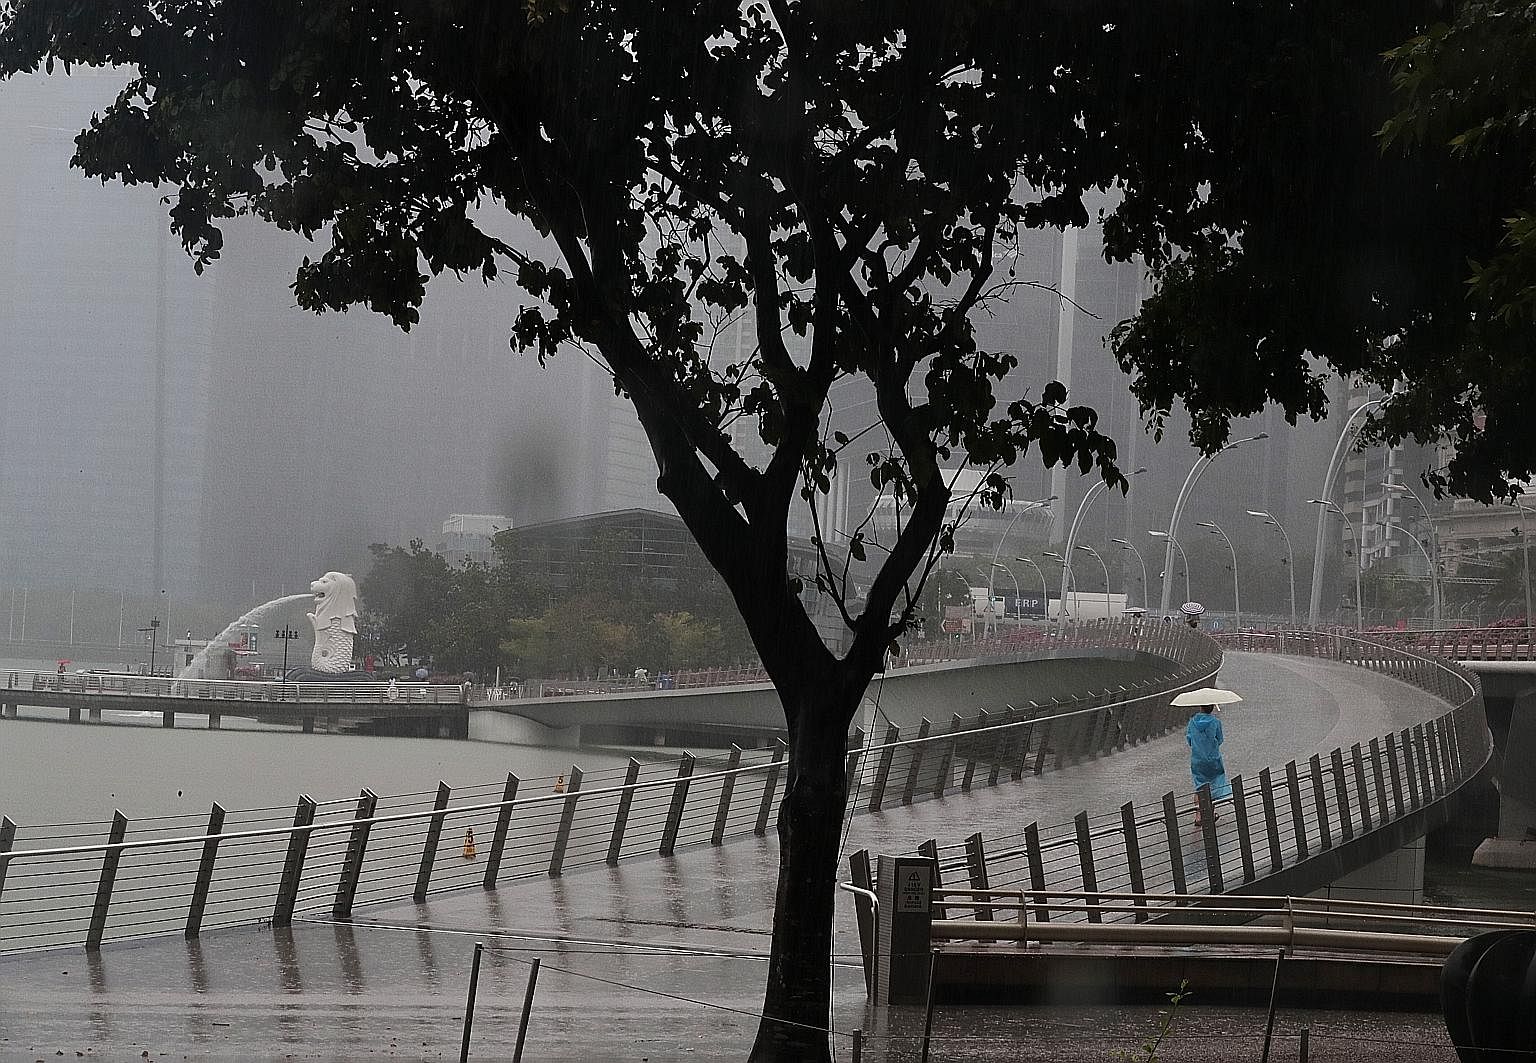 Rain drenched Singapore yesterday, bringing much-needed - even if temporary - relief from the haze. The National Environment Agency said rain is expected to continue over the next few days. But it added that Singapore may still experience occasional 